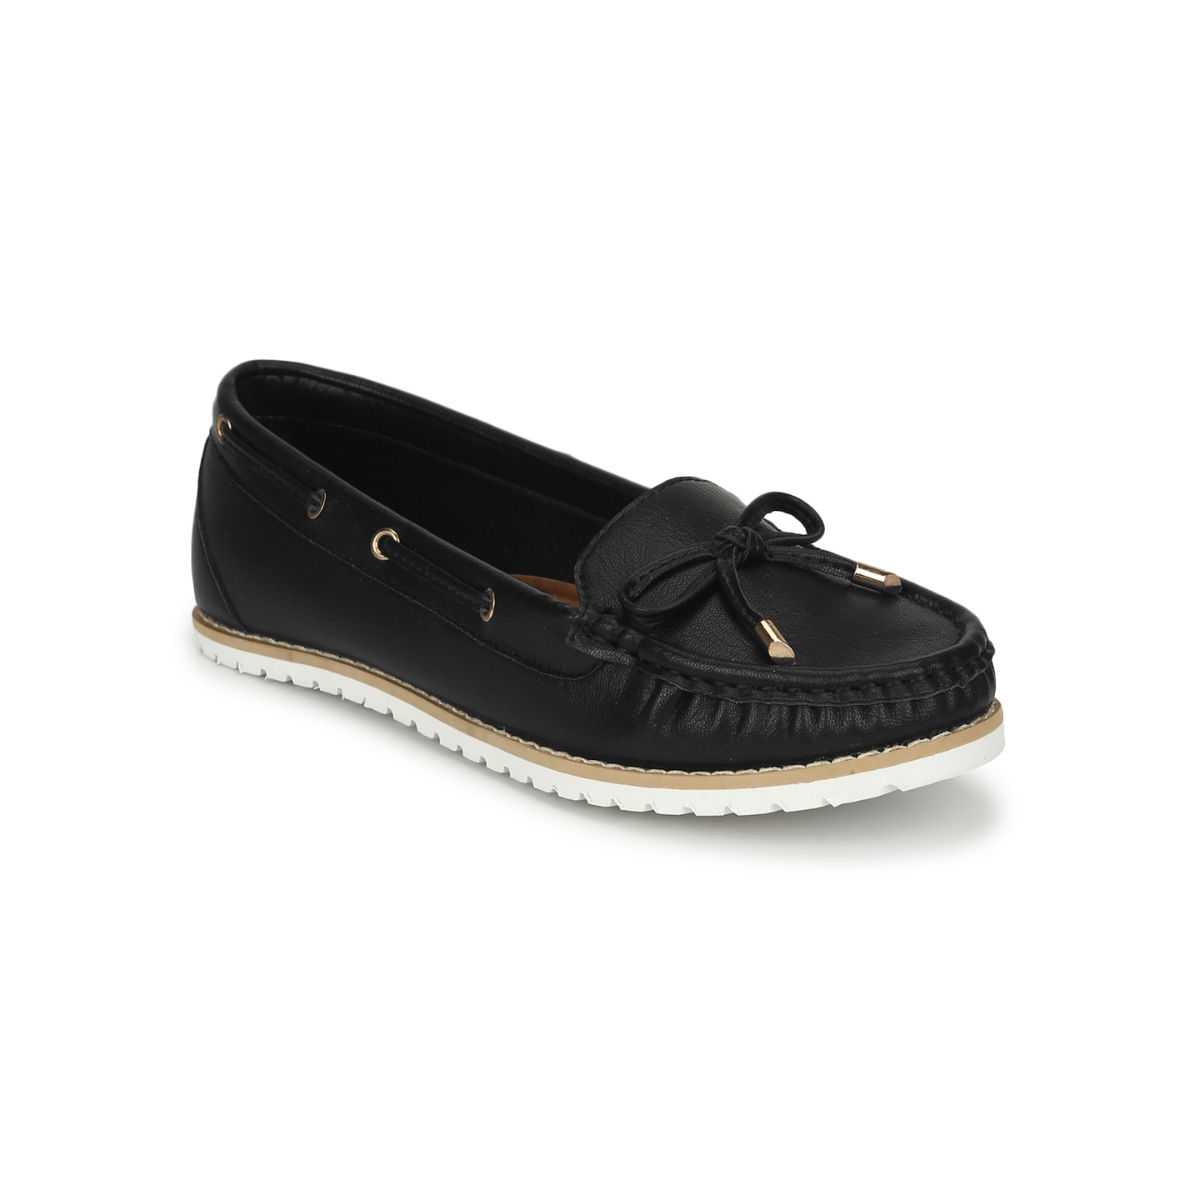 Truffle Collection Black Pu Flat Belly Shoes - UK 4: Buy Truffle Collection  Black Pu Flat Belly Shoes - UK 4 Online at Best Price in India | Nykaa